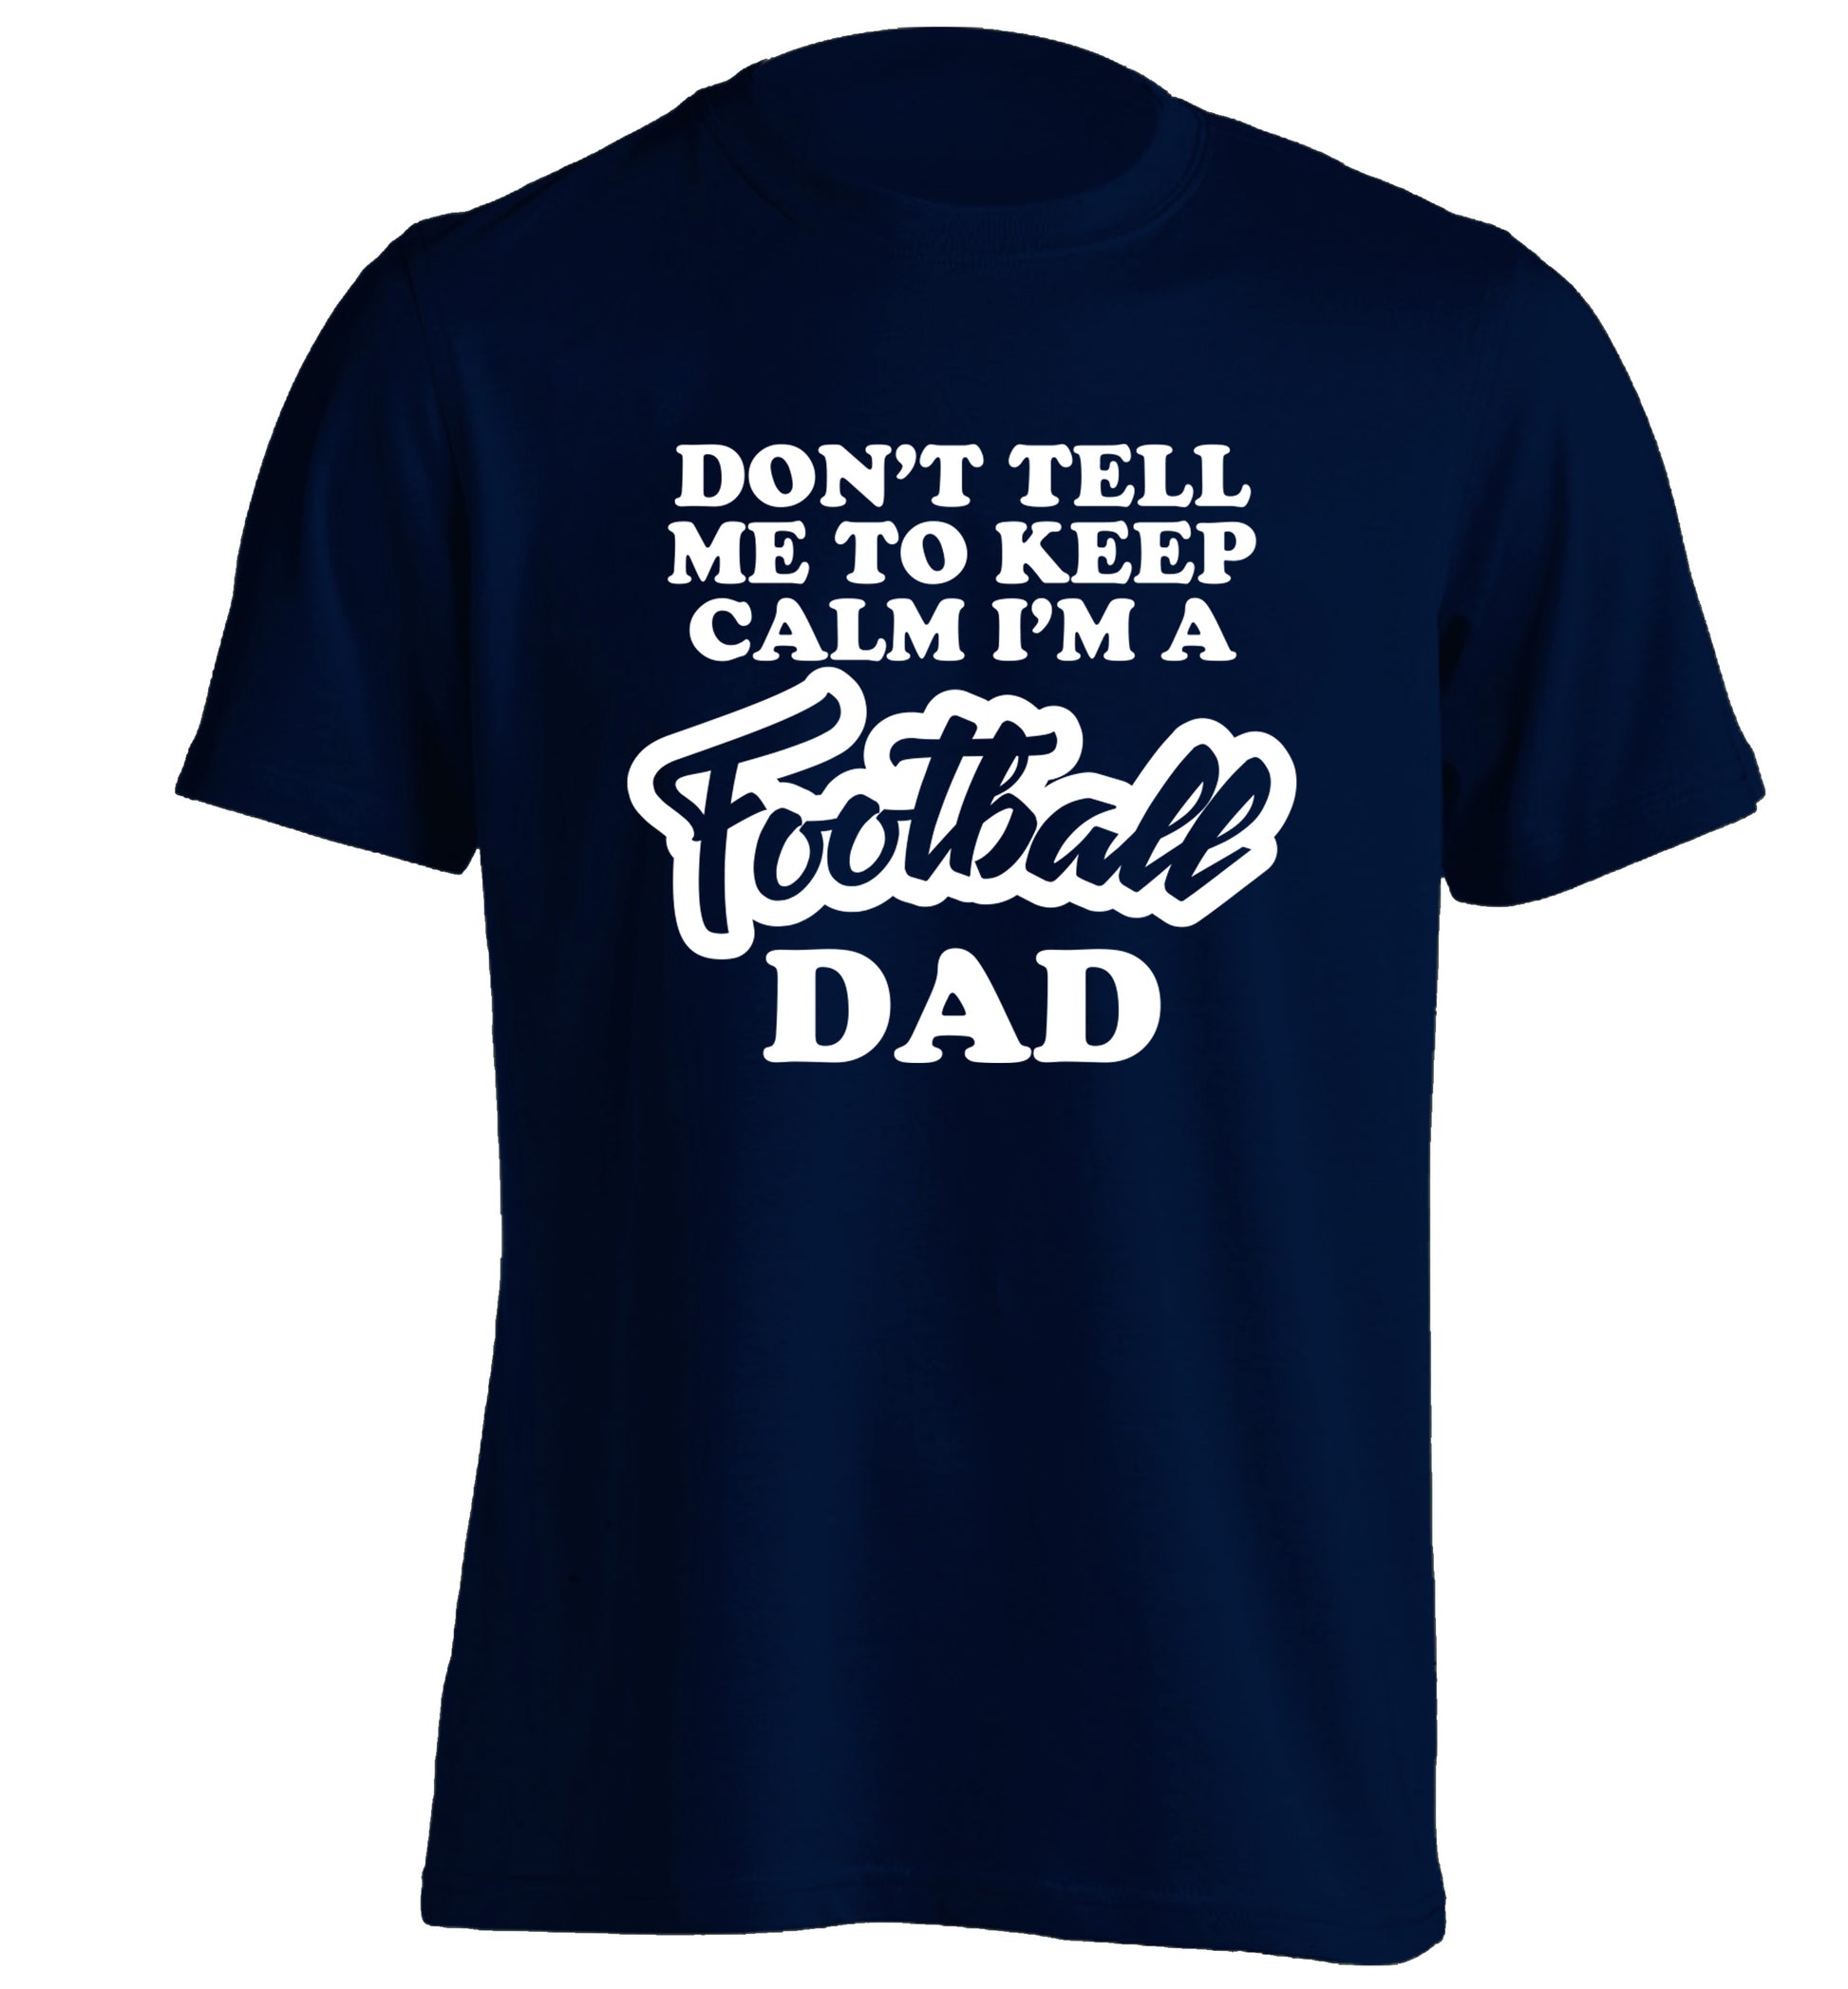 Don't tell me to keep calm I'm a football dad adults unisexnavy Tshirt 2XL